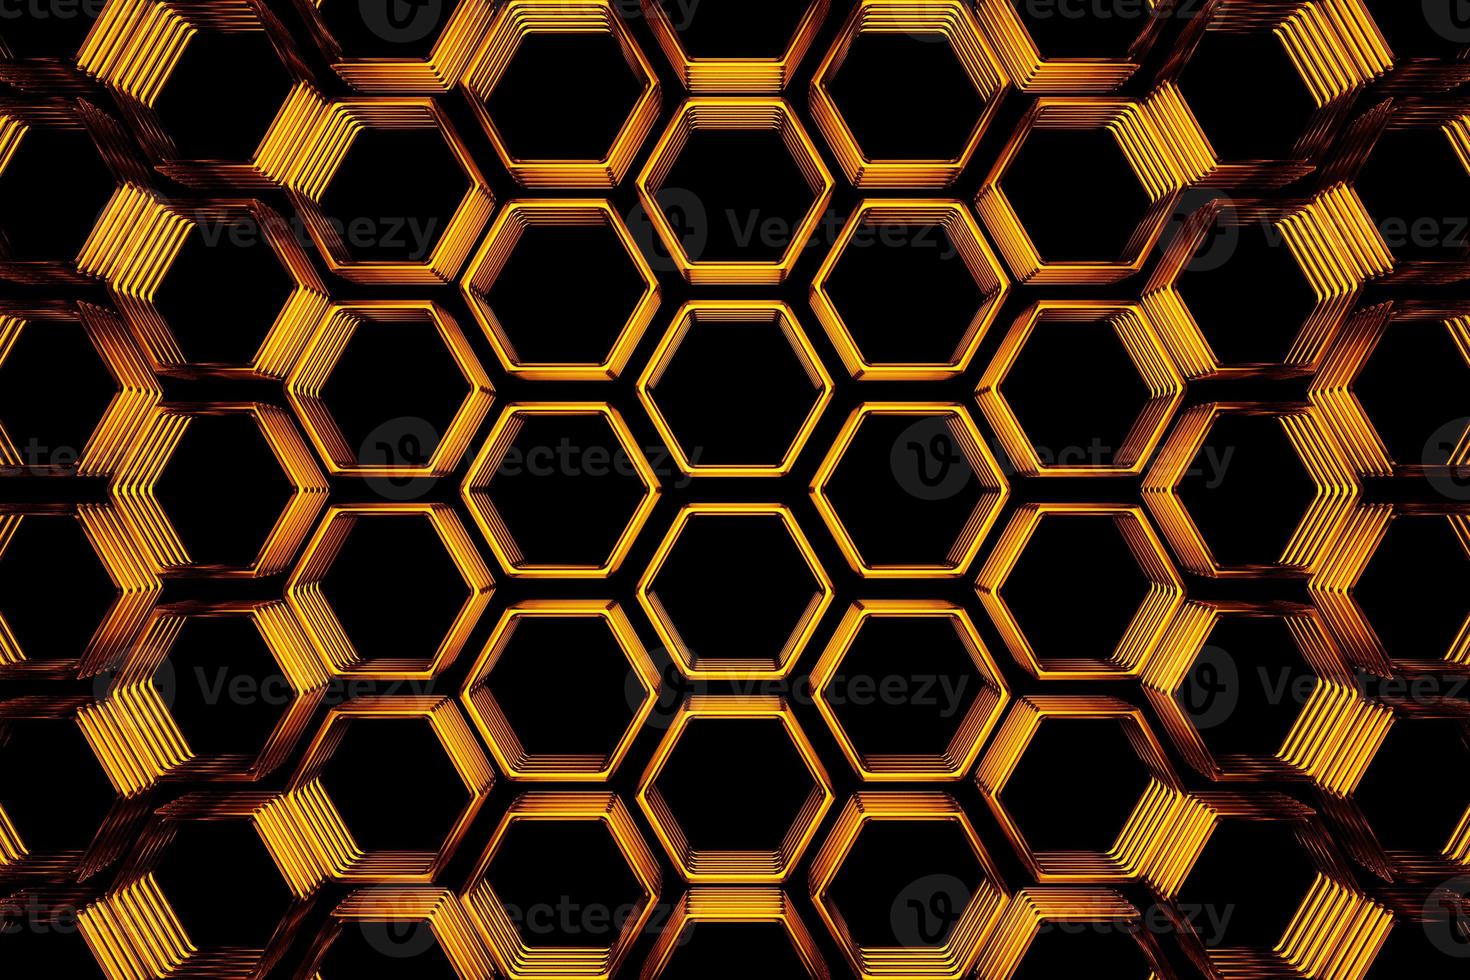 3d illustration of a yellow honeycomb monochrome honeycomb for honey. Pattern of simple geometric hexagonal shapes, mosaic background. photo